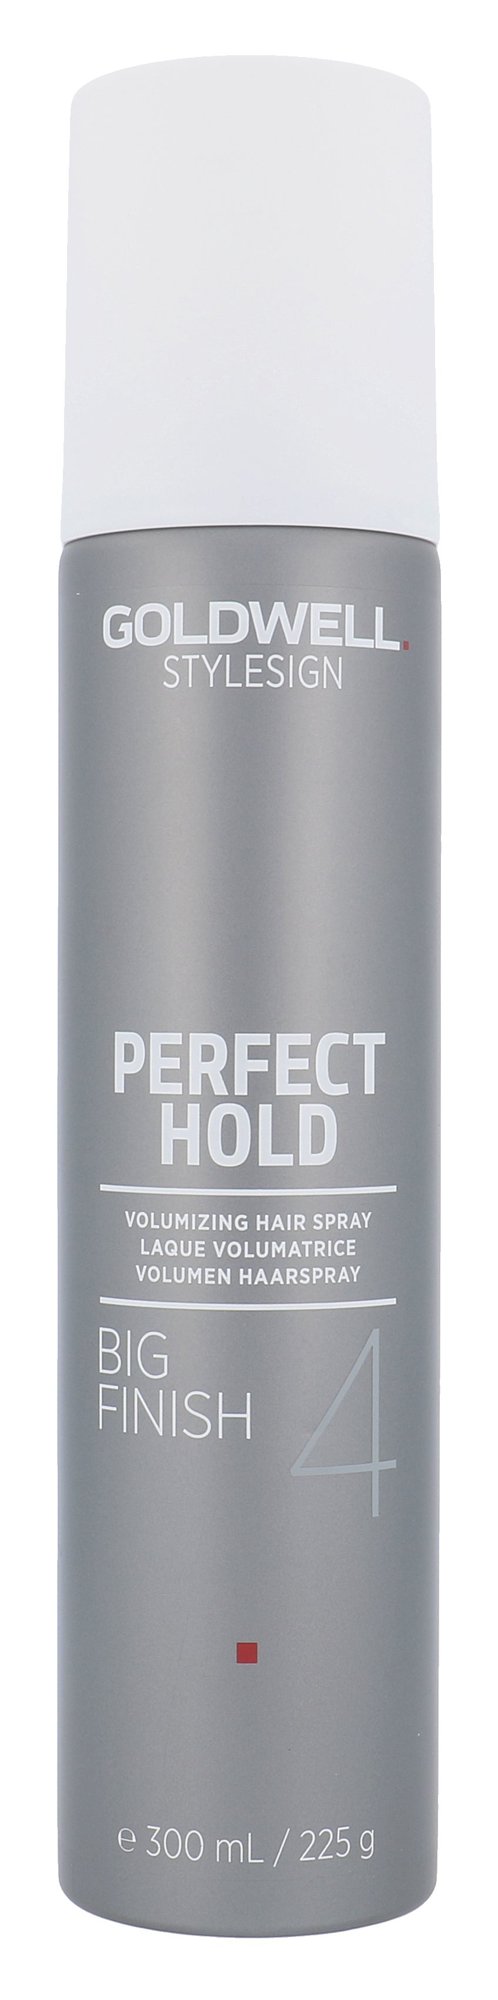 Goldwell Style Sign Perfect Hold 300ml plaukų lakas